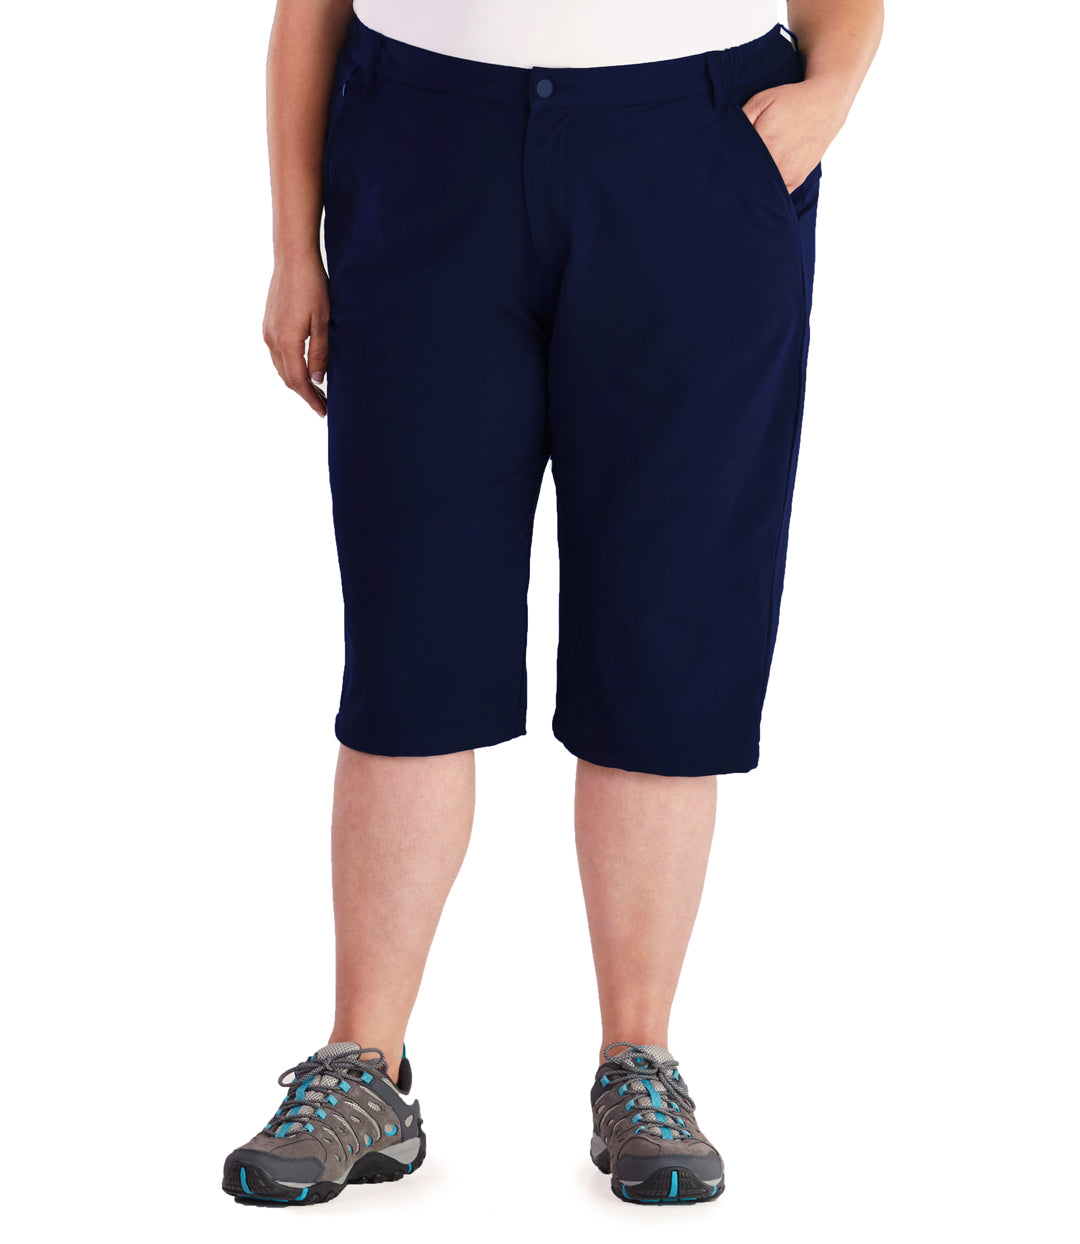 Bottom half of plus sized woman, front view, wearing JunoActive Hiking and Travel Short in color navy. Bottom hem is just below the knee. She is wearing hiking sneakers.